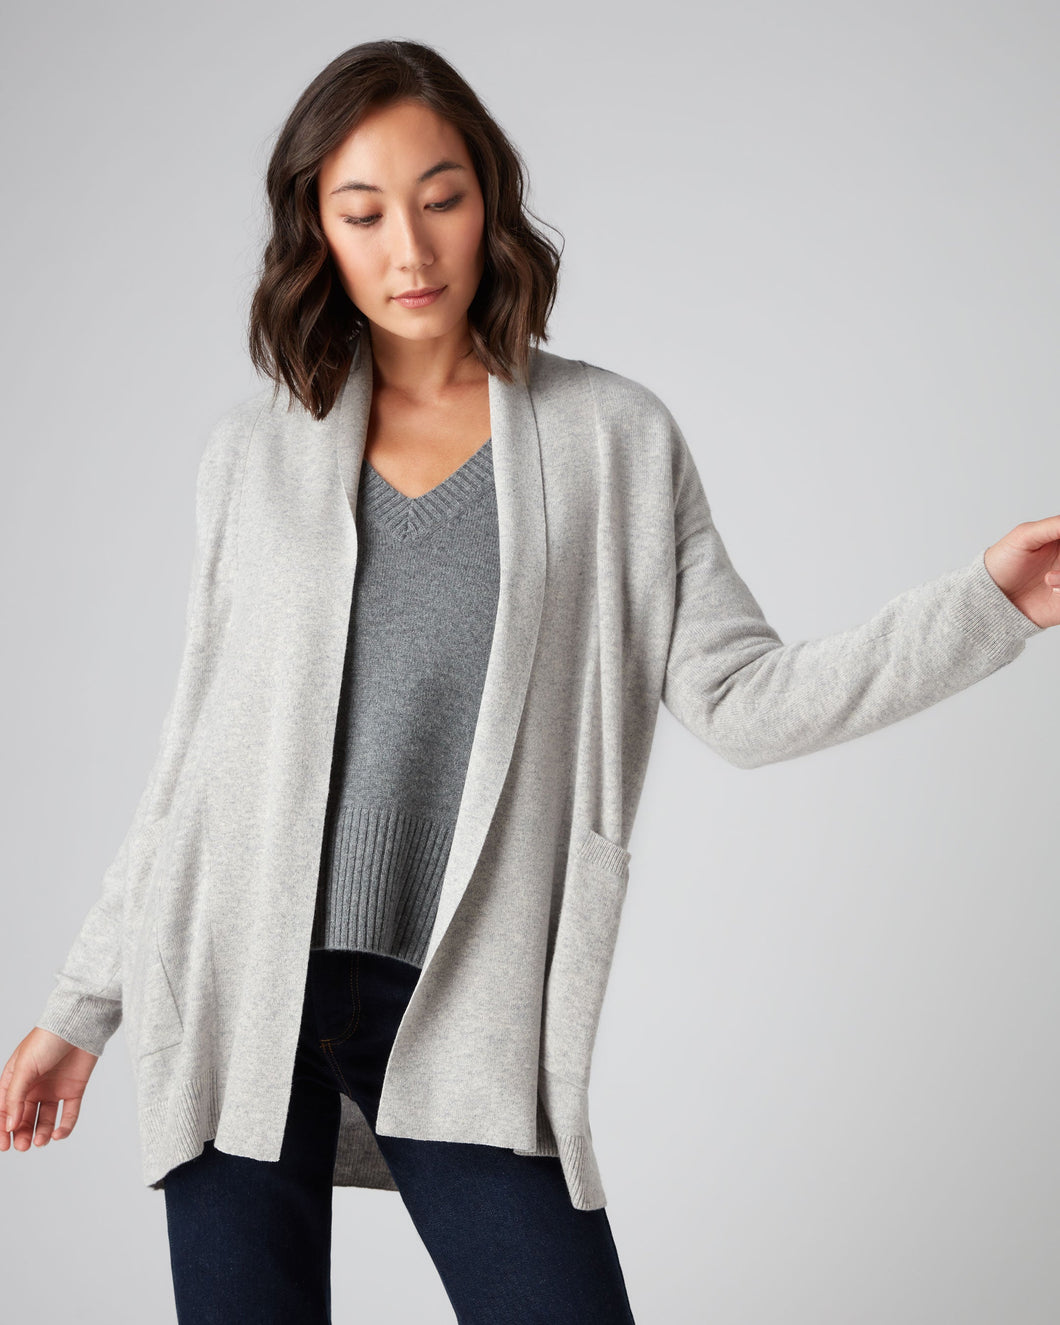 N.Peal Women's Cable Sleeve Cashmere Cardigan Fumo Grey